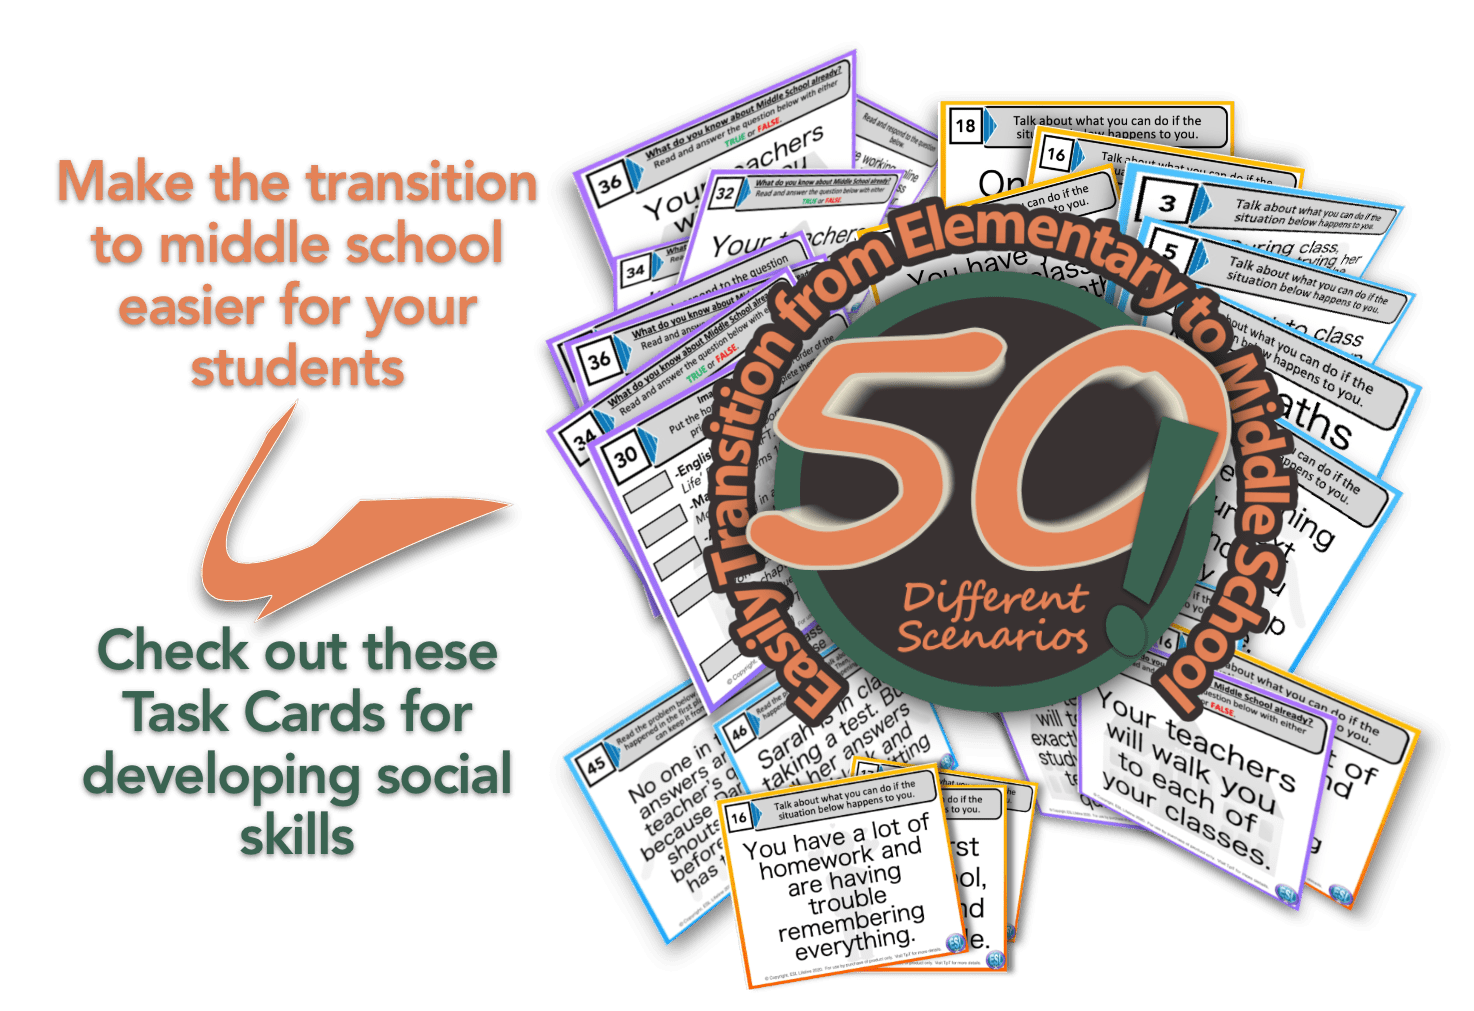 Middle School task cards for developing social skills and awareness